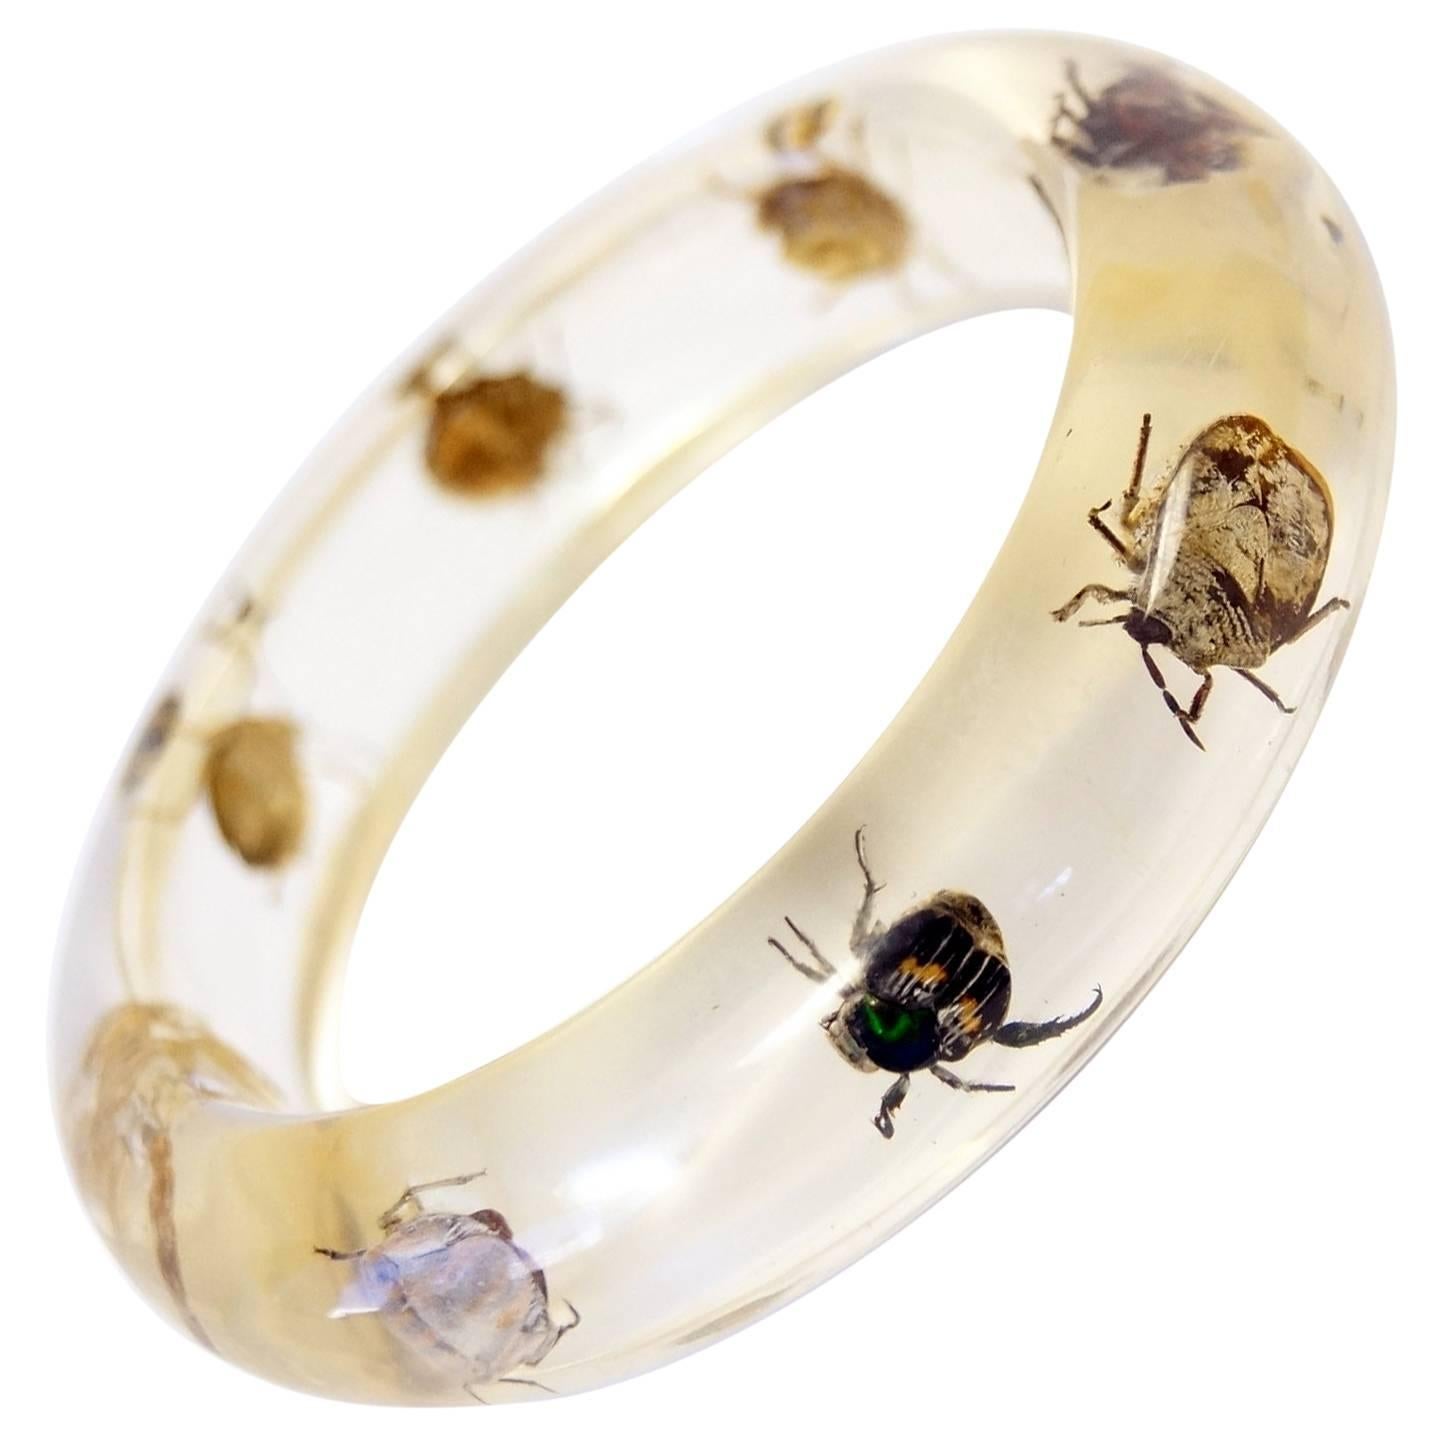 Vintage Lucite Bangle Bracelet with Real Beetles and Scorpion